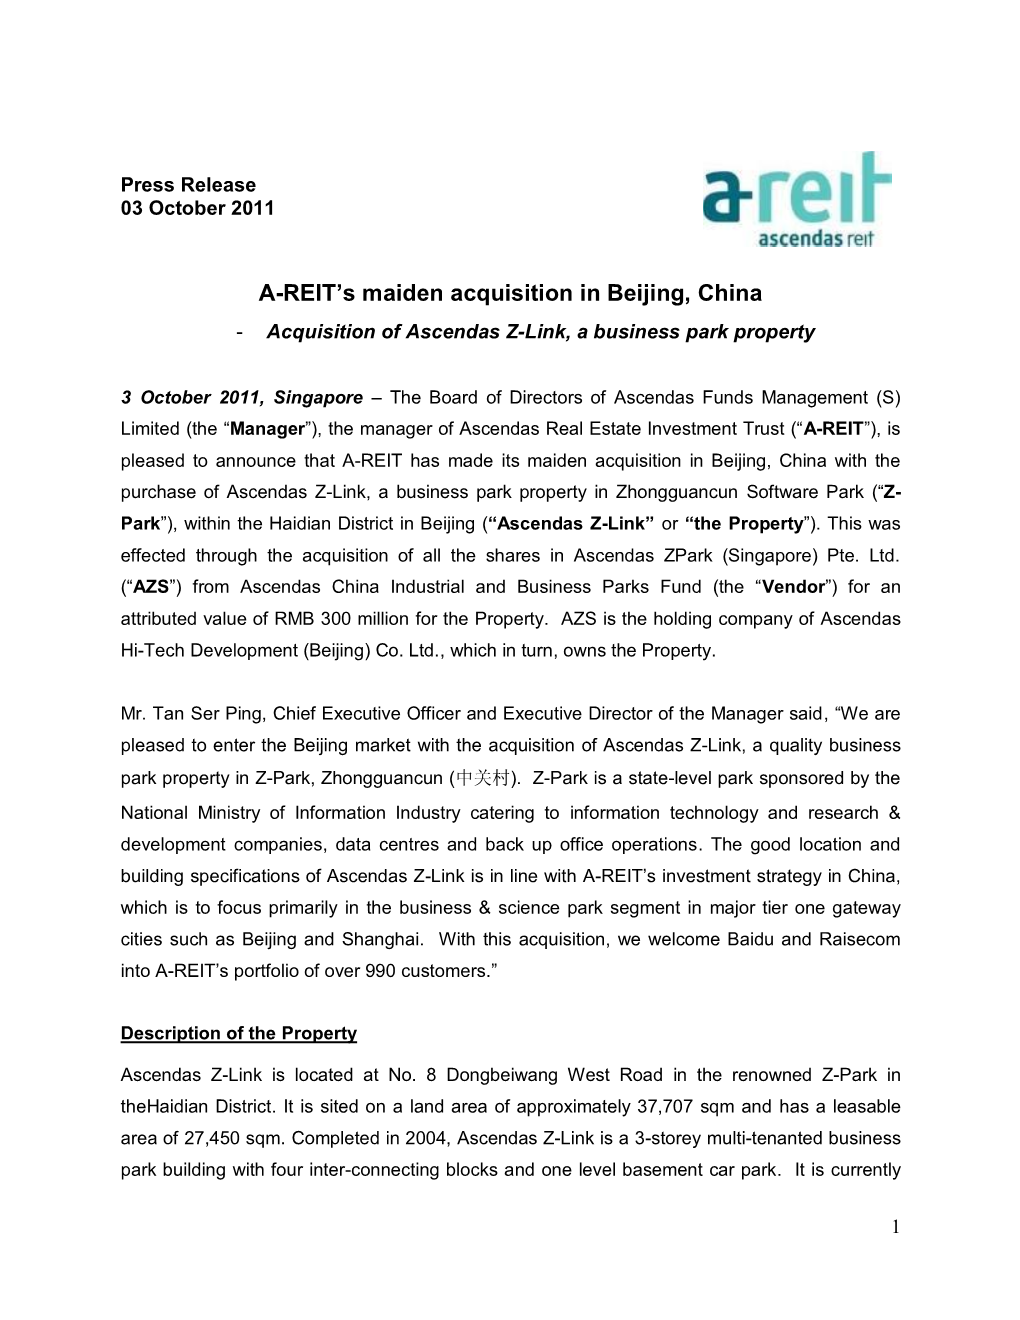 A-REIT's Maiden Acquisition in Beijing, China